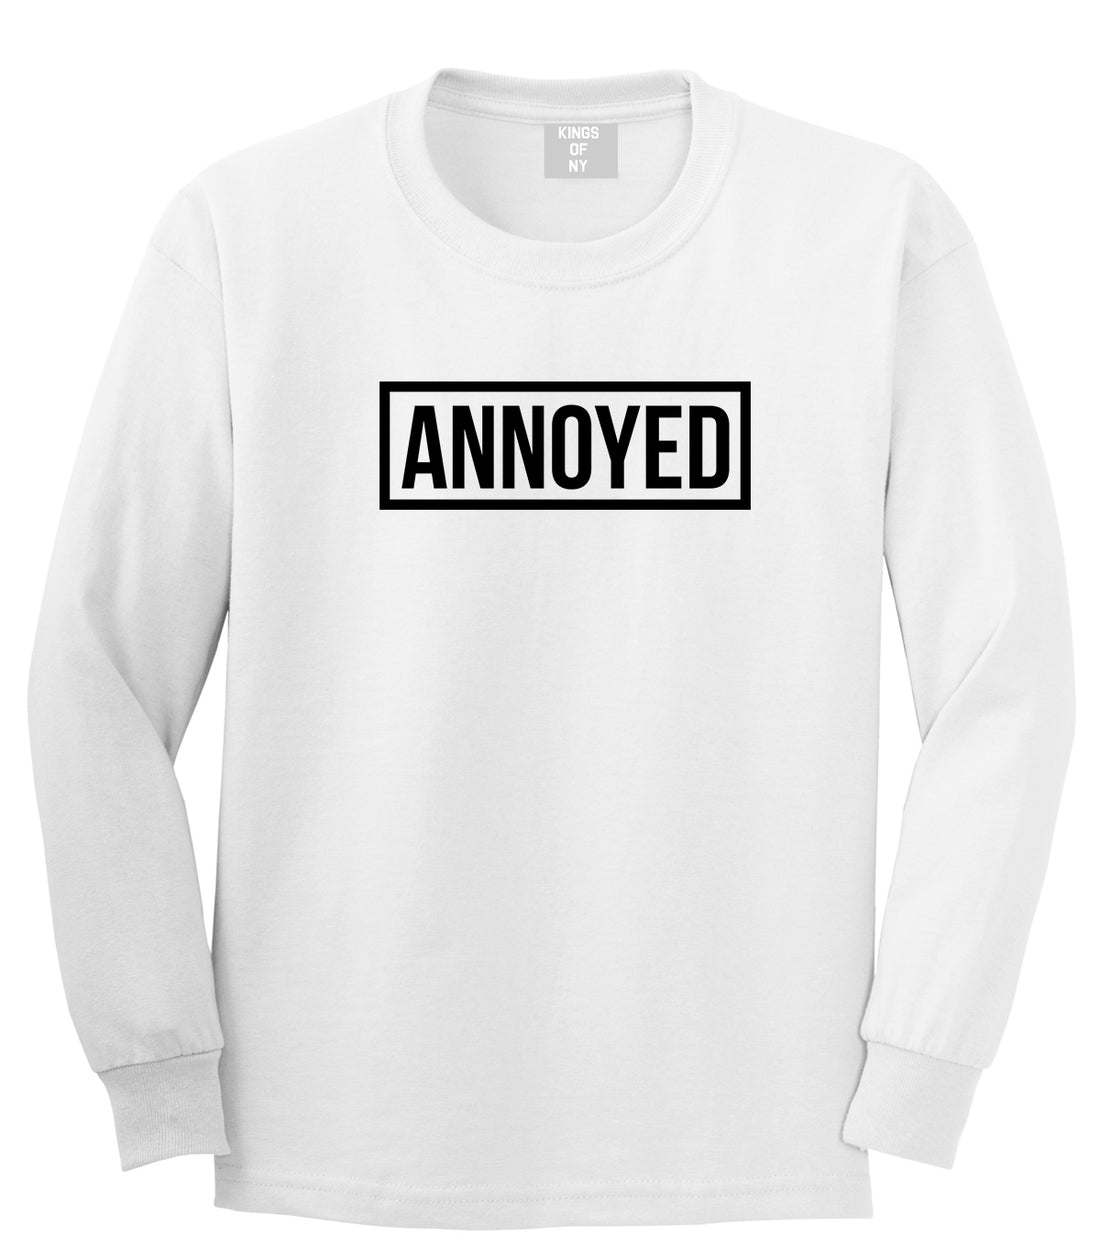 Annoyed White Long Sleeve T-Shirt by Kings Of NY